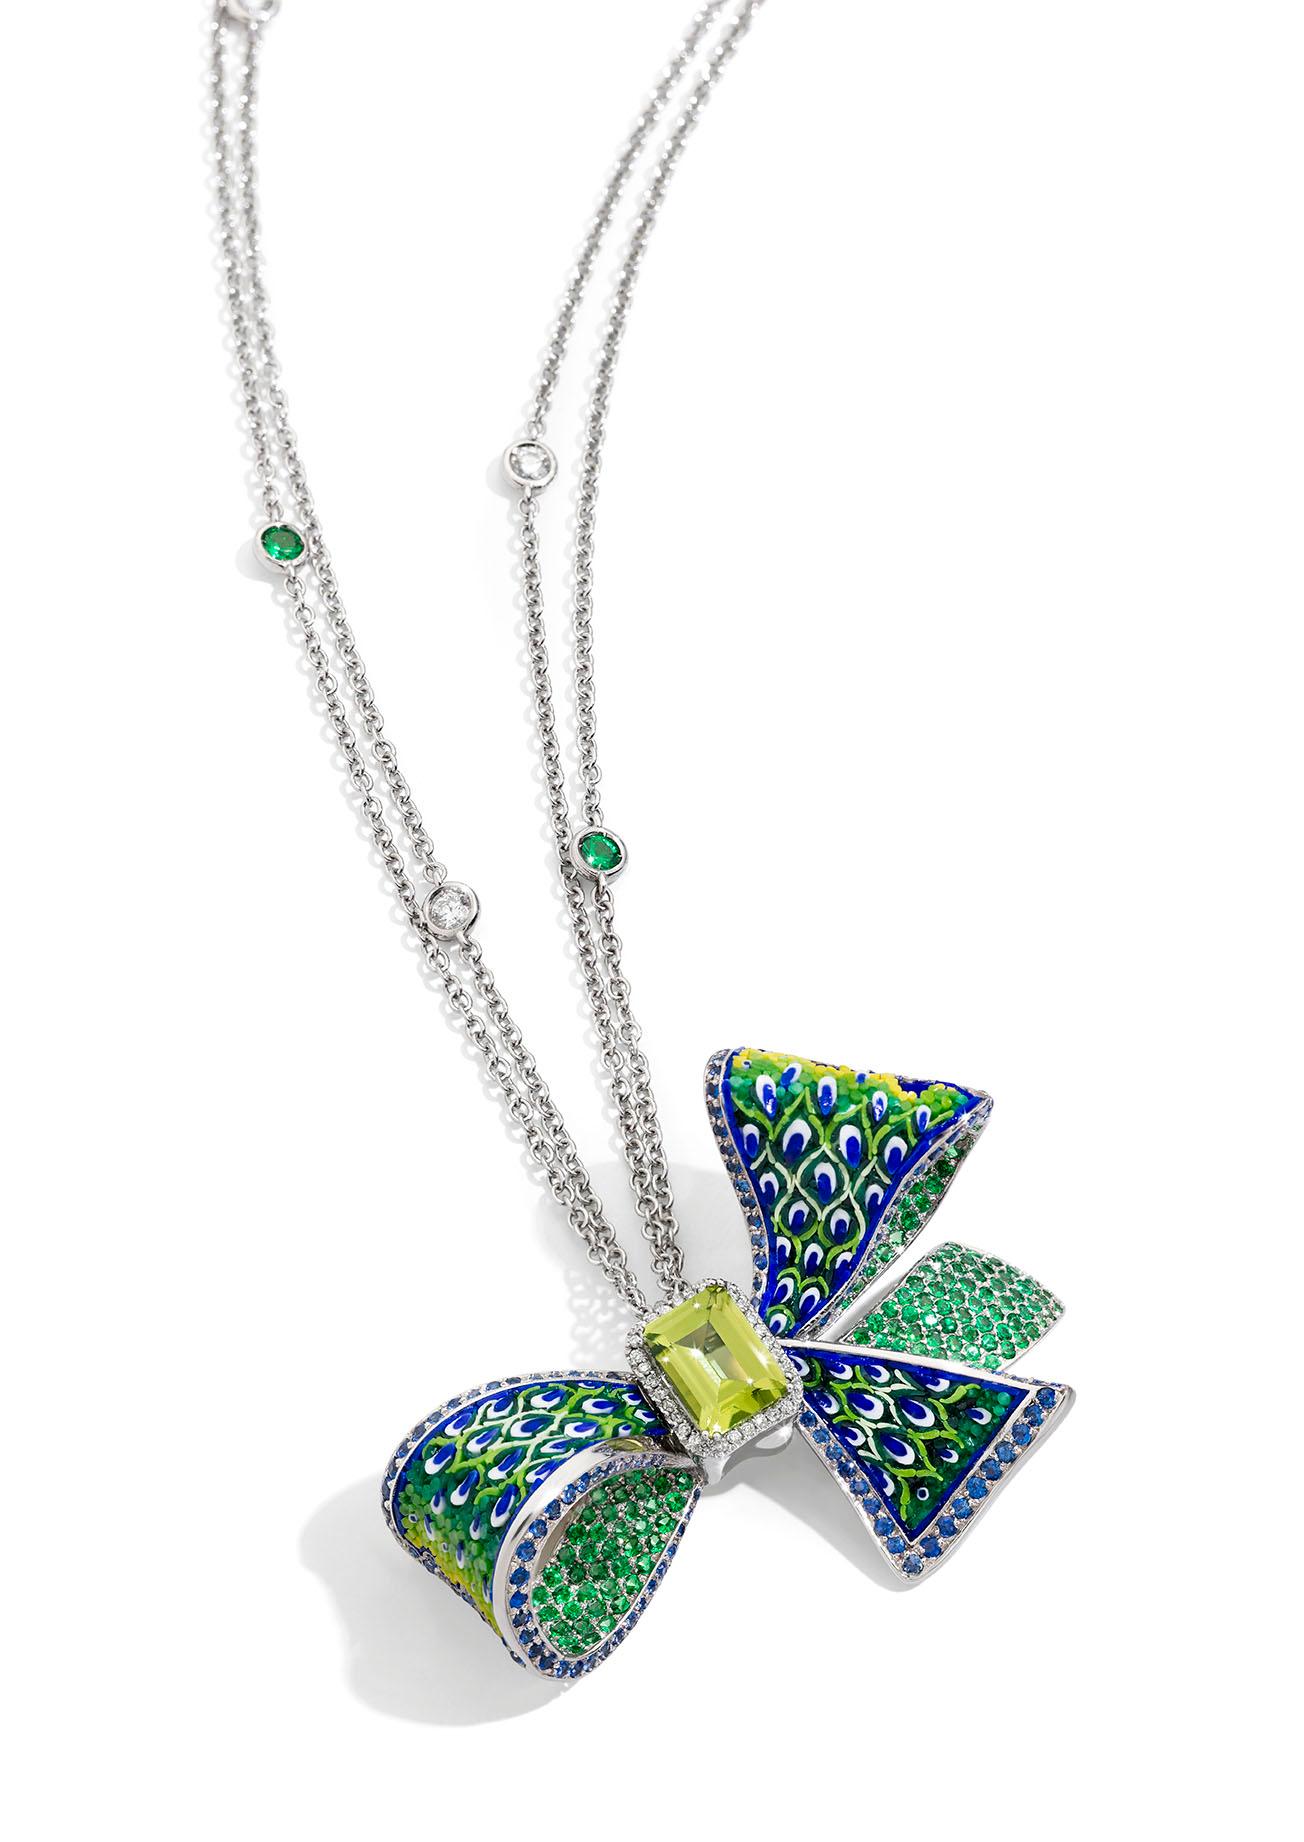 Modern Green Ribbon Necklace White Gold White Diamonds Peridote Decorated Micromosaic  For Sale